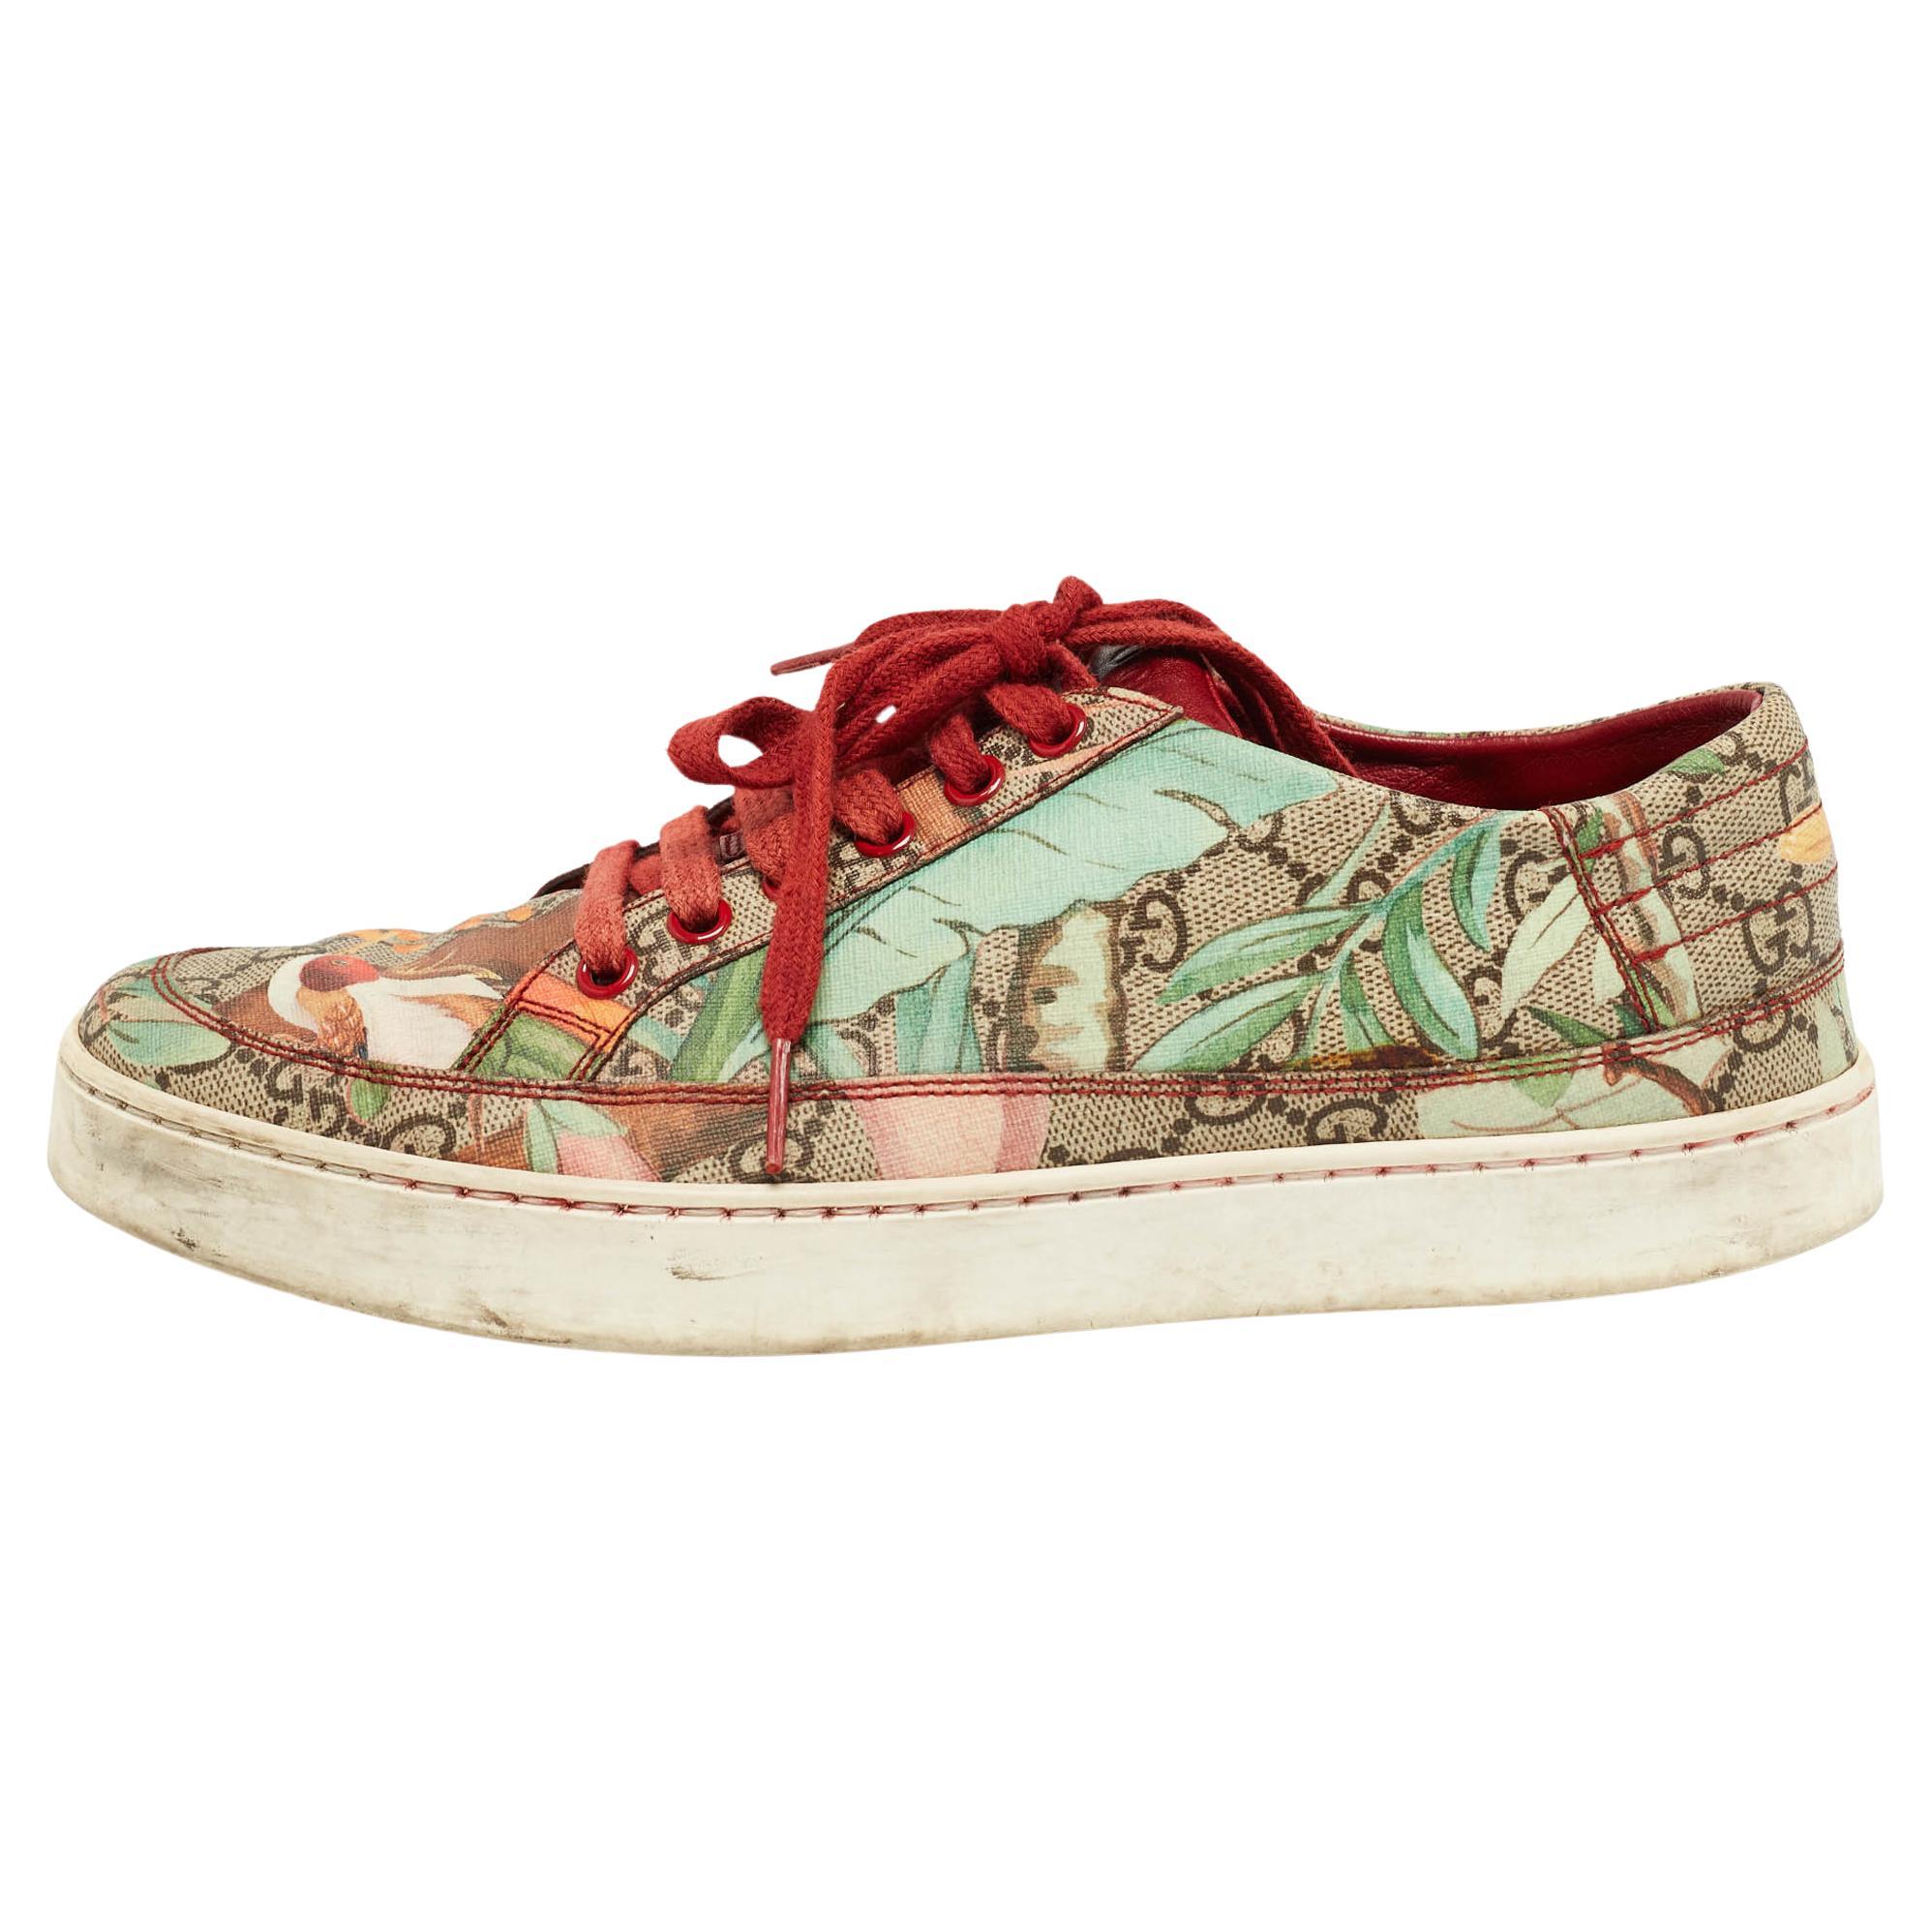 Gucci Multicolor Canvas Tian Low Top Sneakers Size 40.5 For Sale